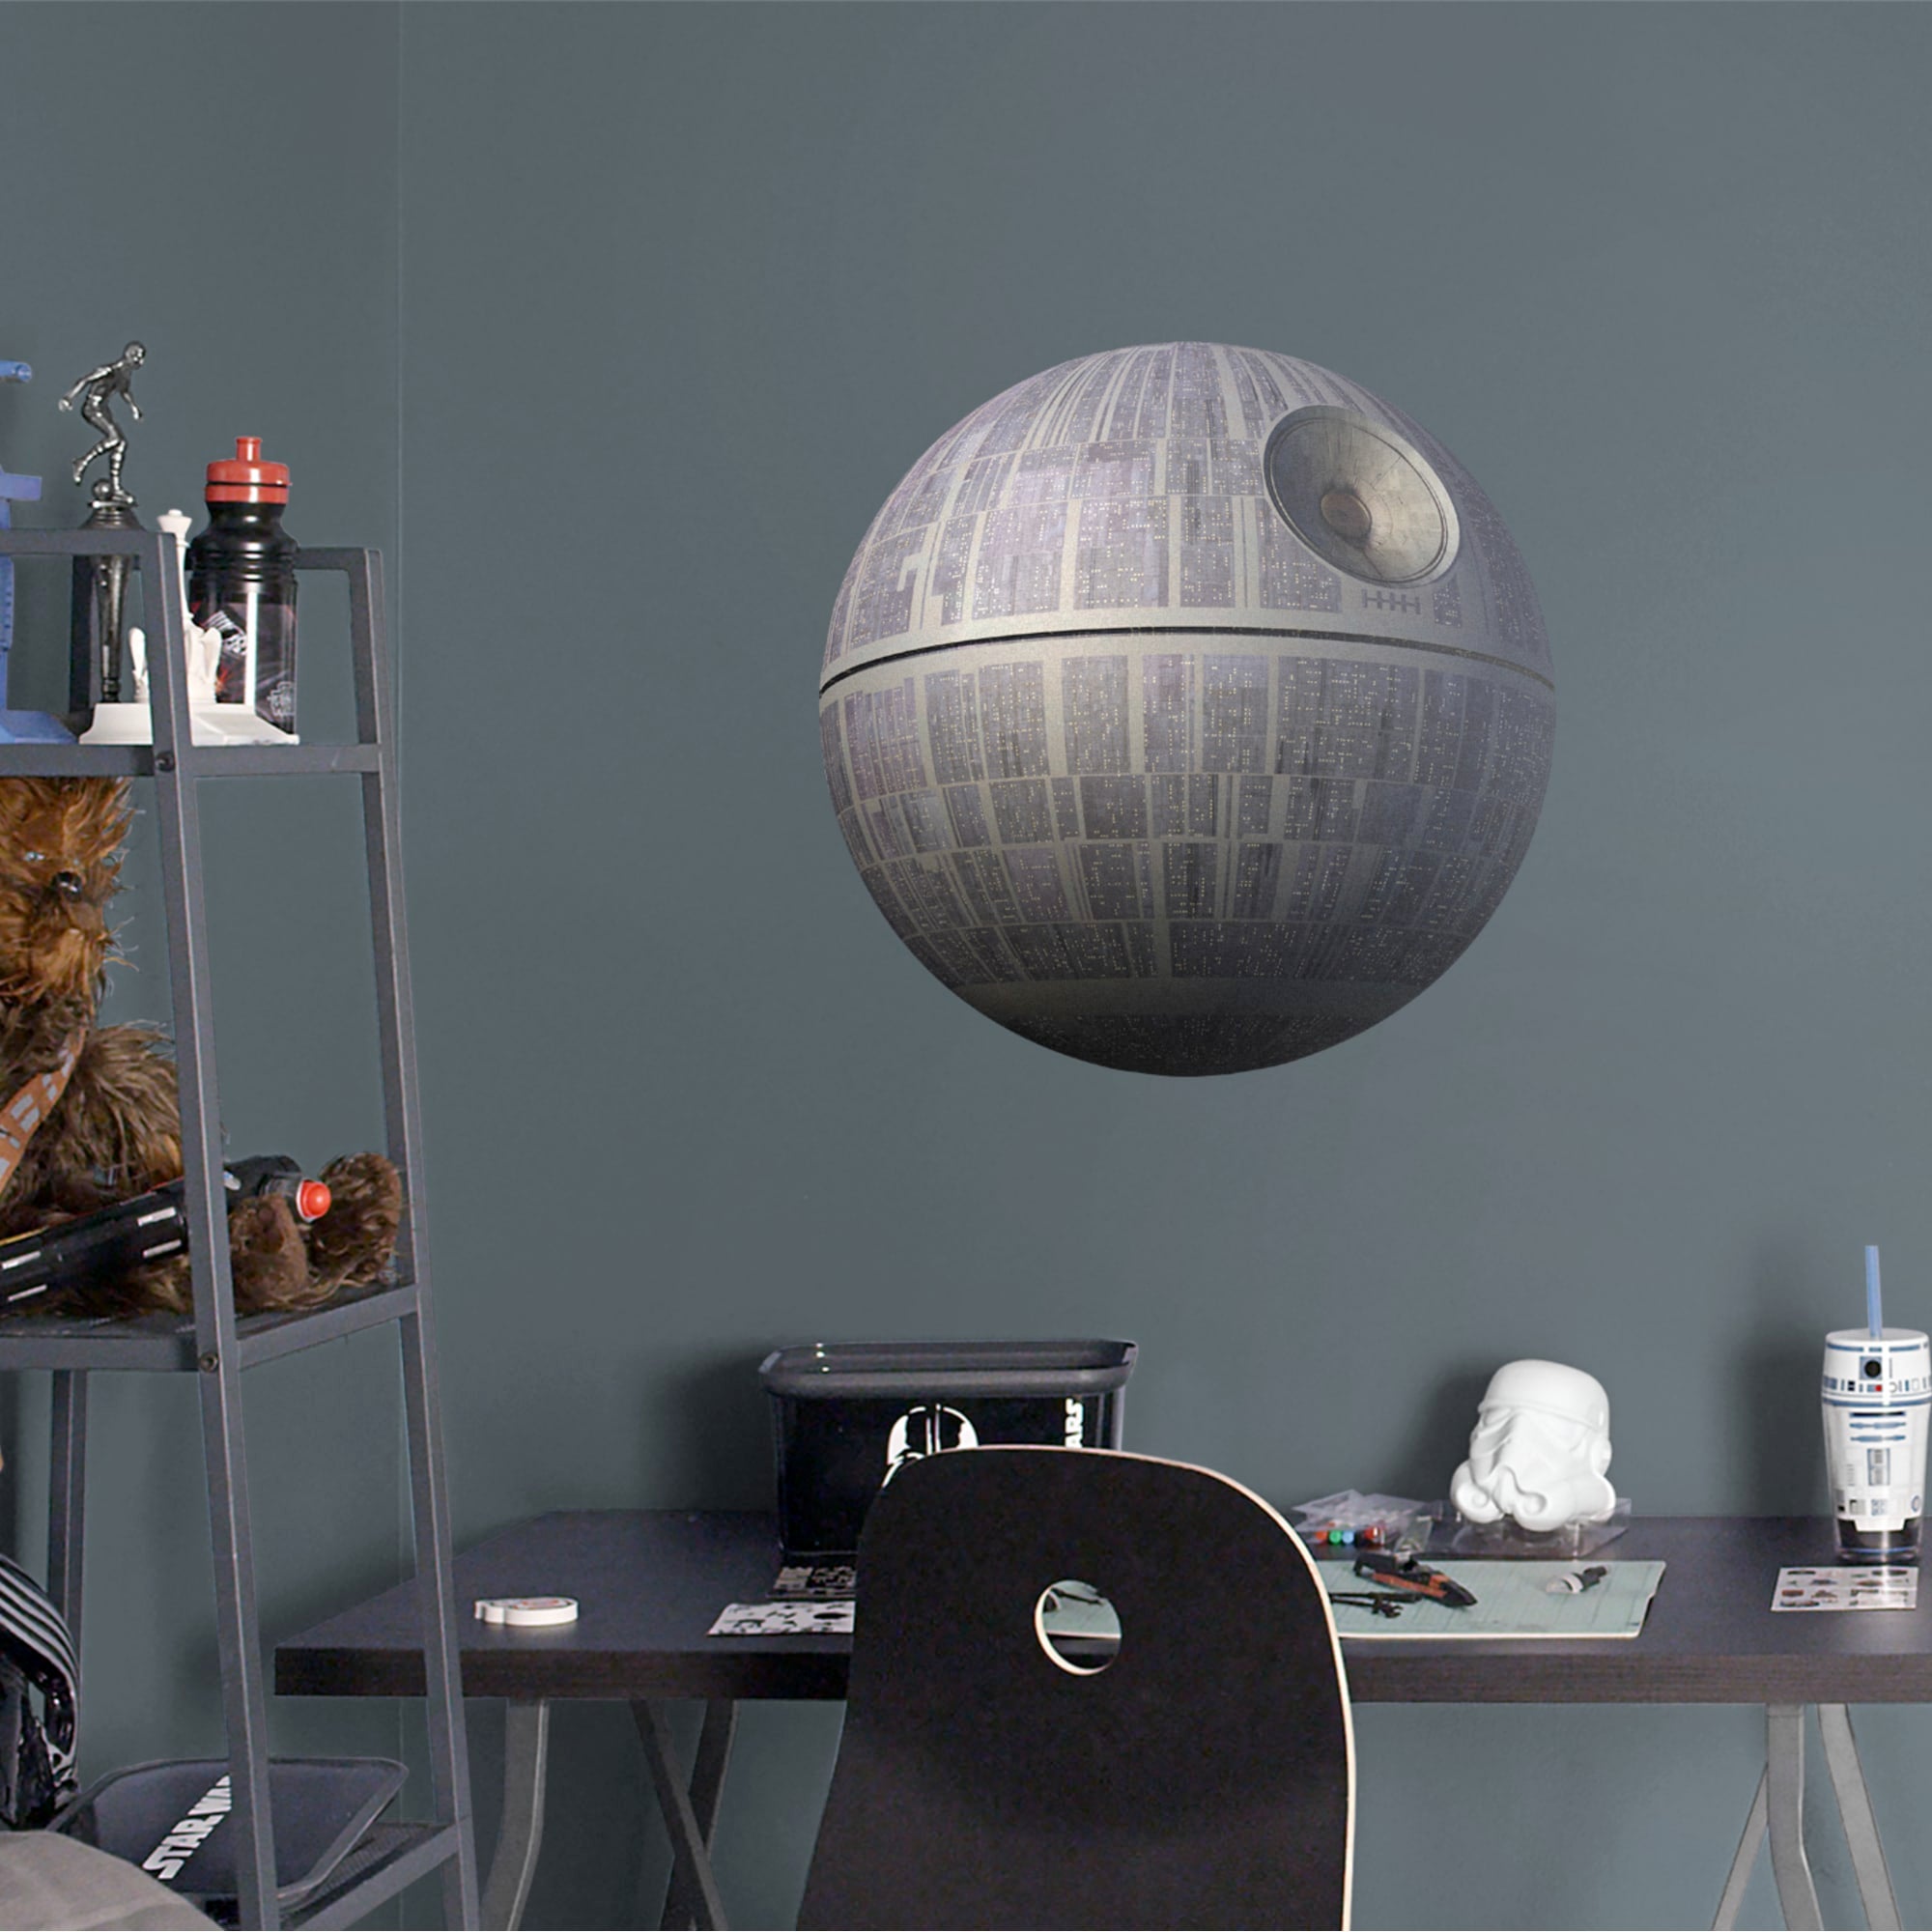 Death Star - Officially Licensed Removable Wall Decal 24.0"W x 24.0"H by Fathead | Vinyl